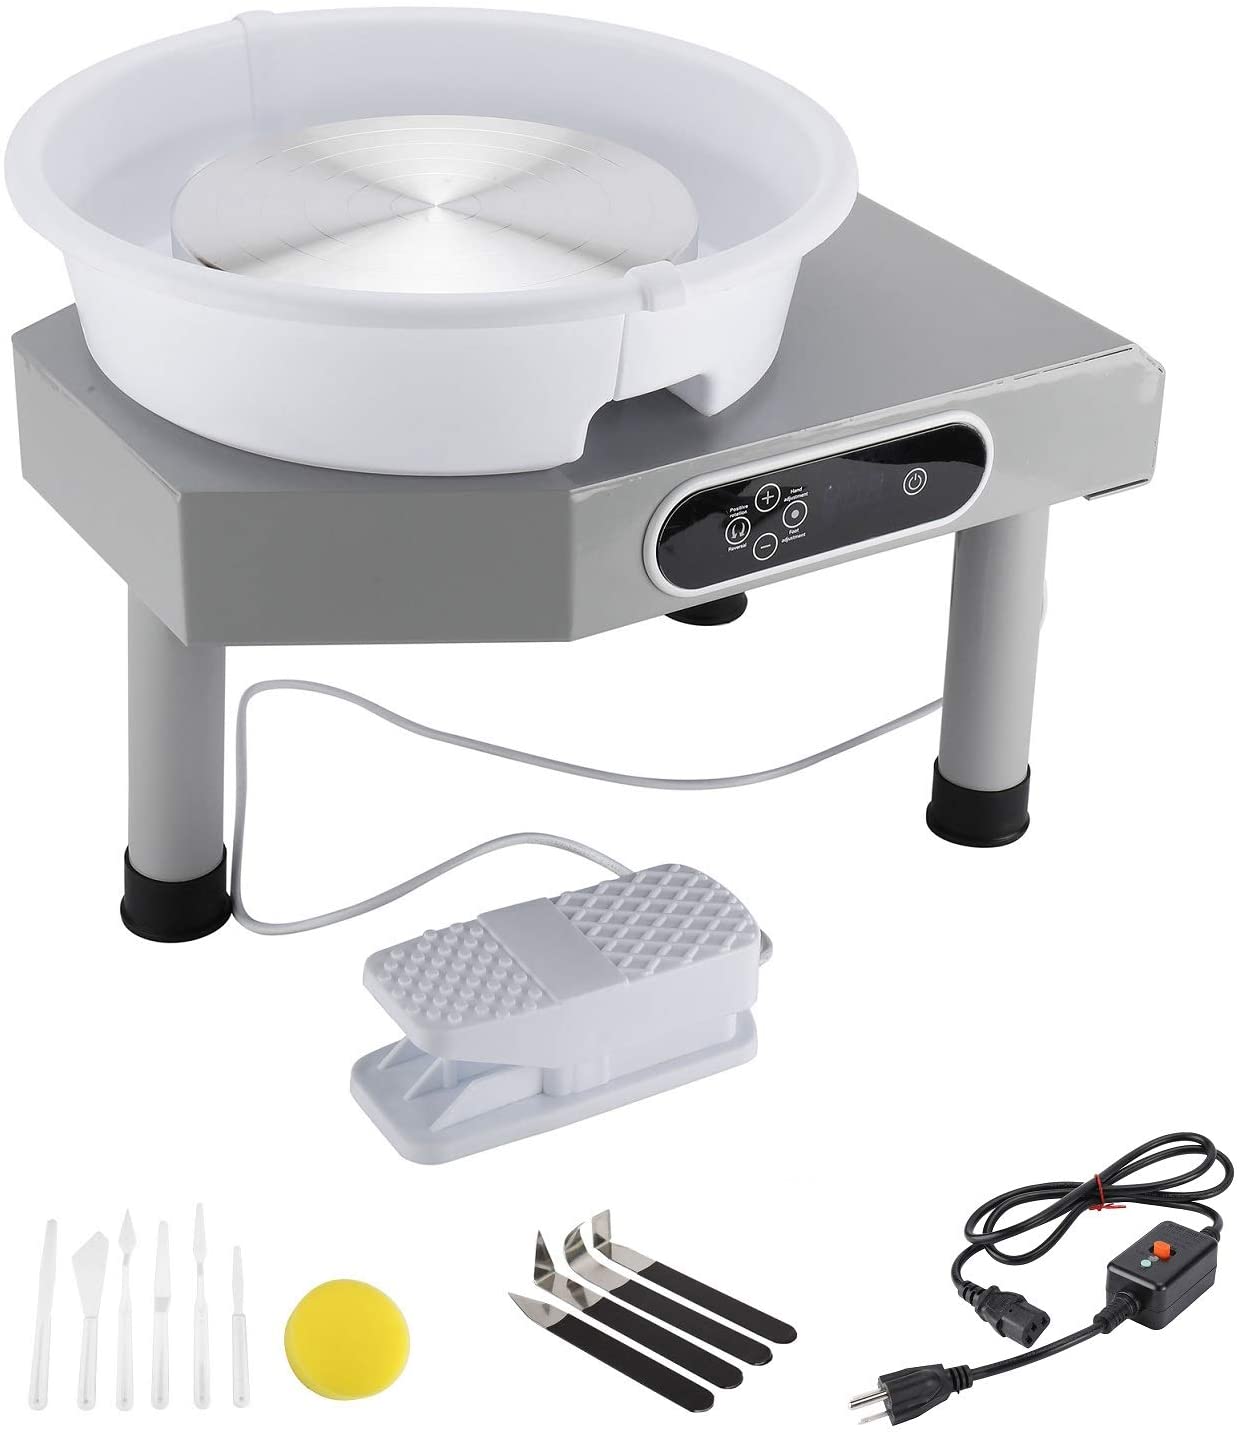 YaeKoo 25CM Electric Pottery Wheel with LCD Touch Screen